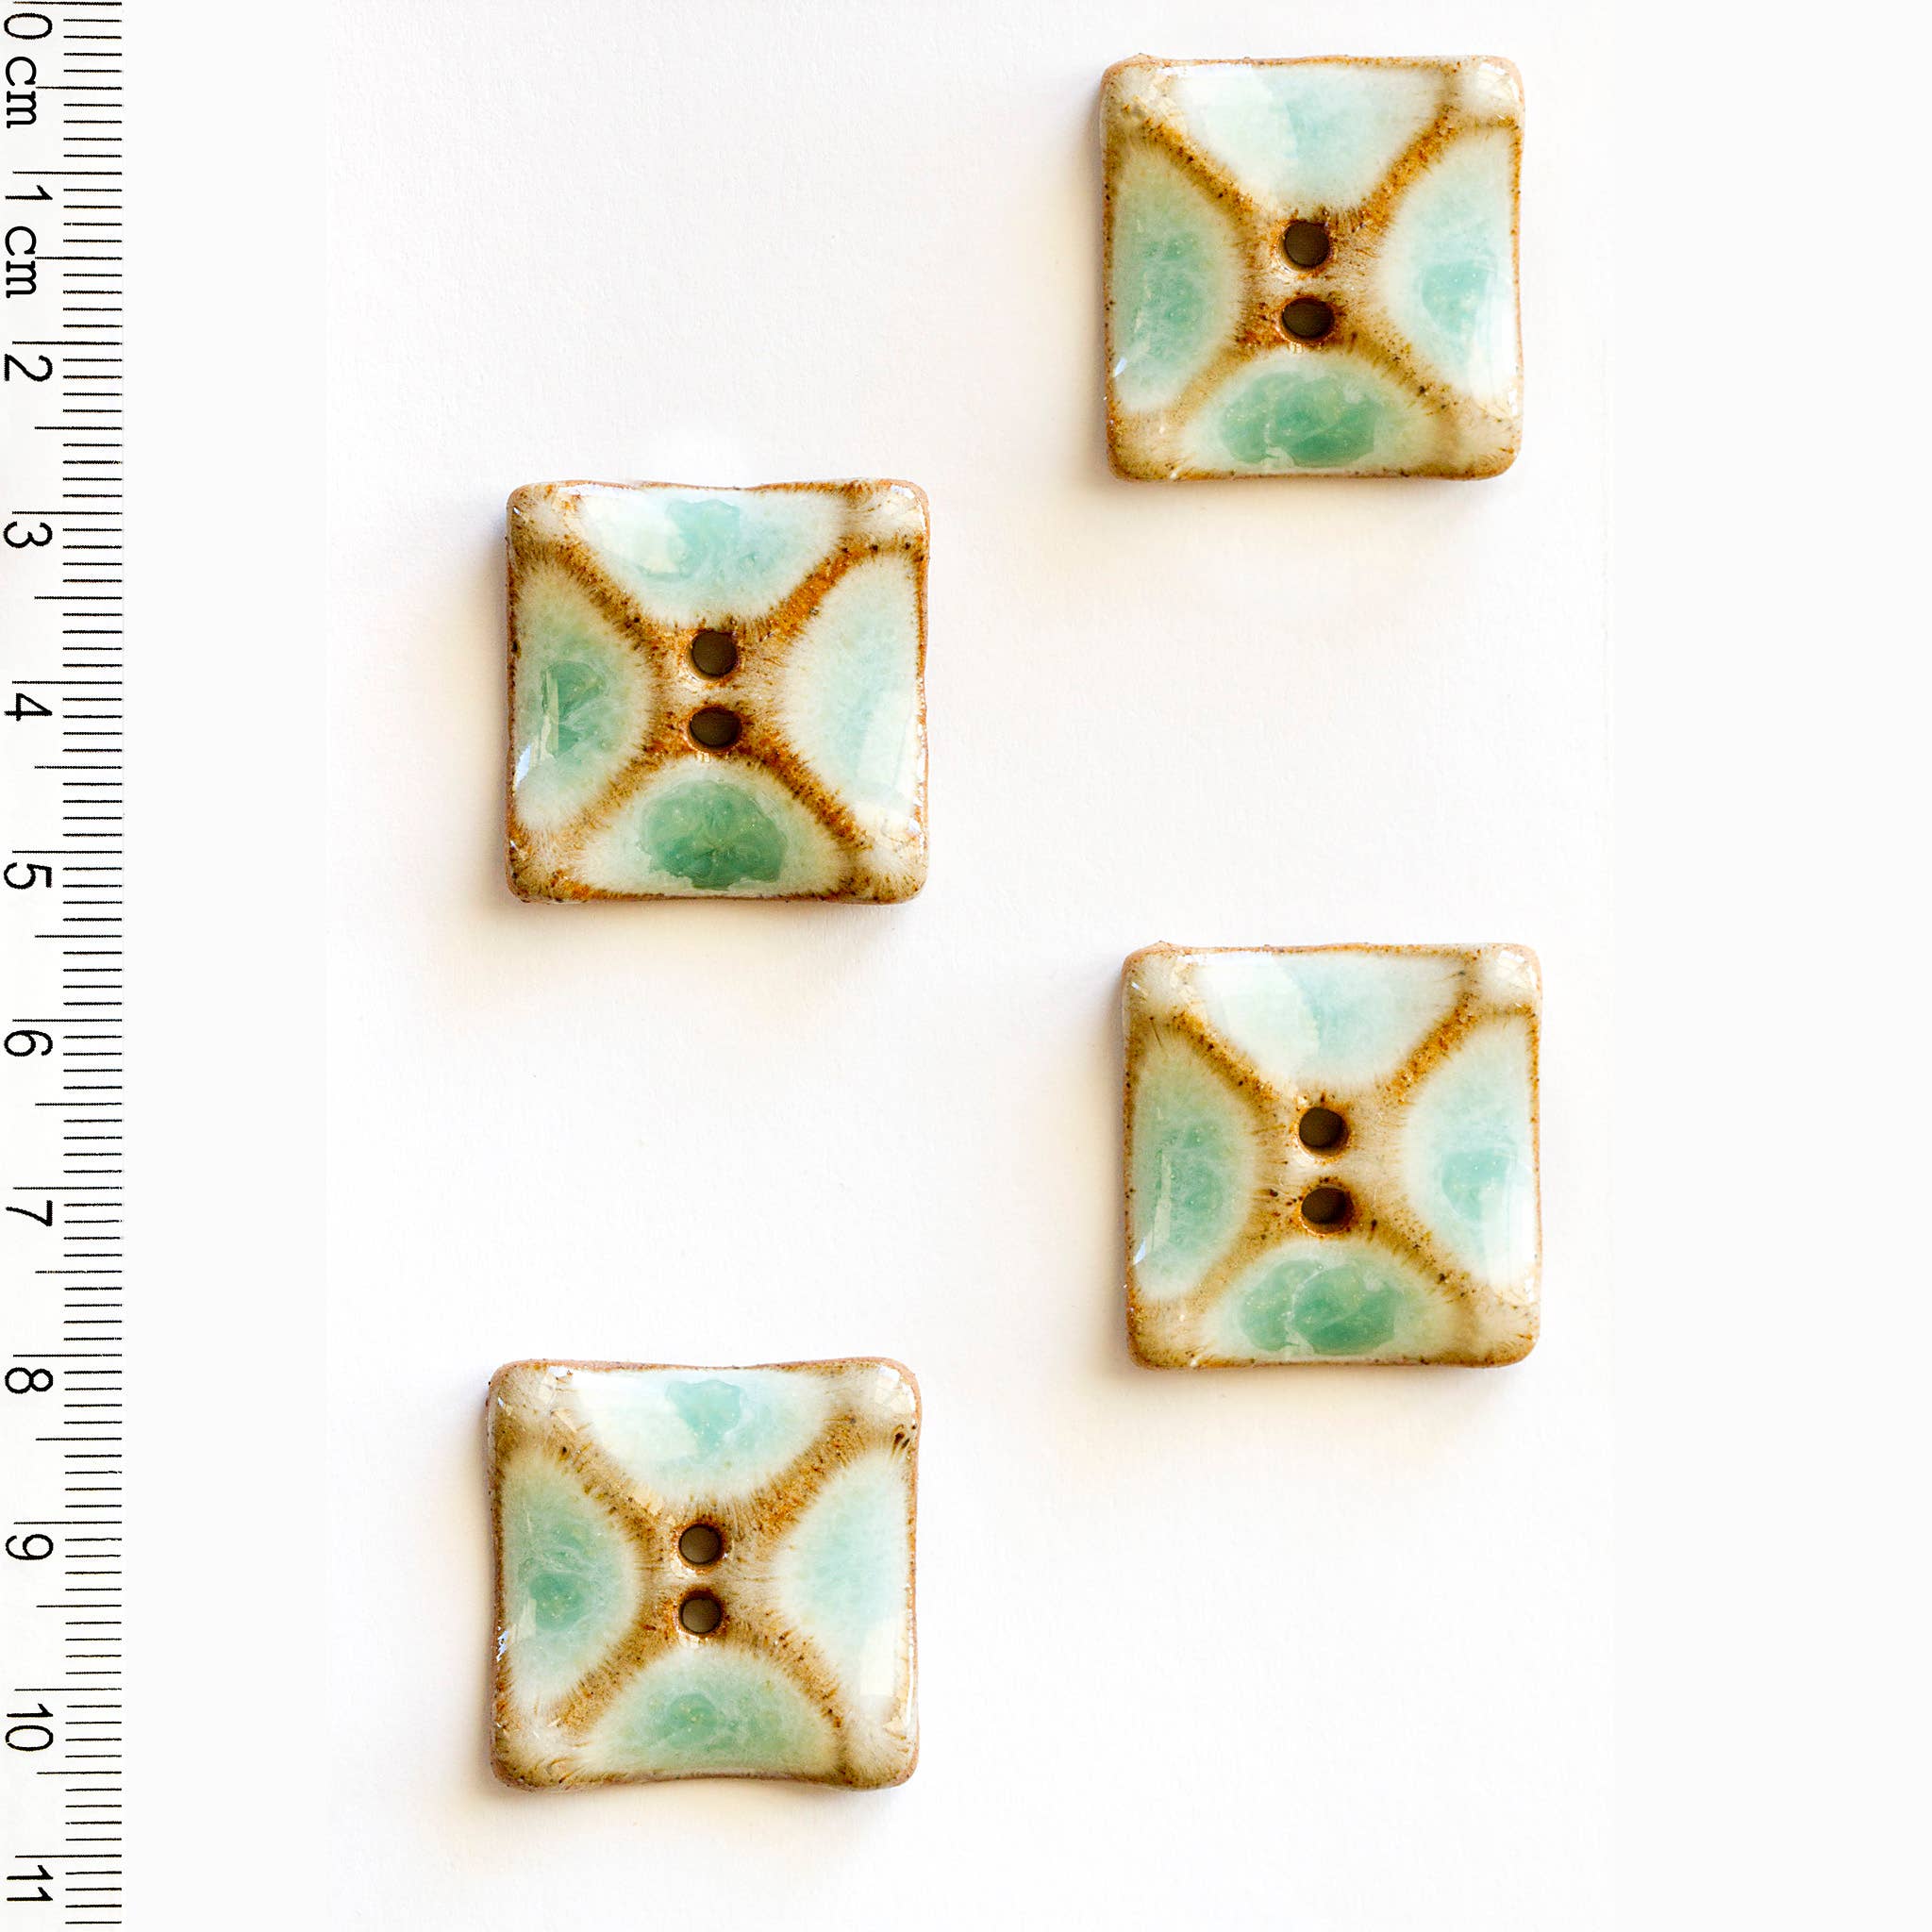 Incomparable Buttons - 4 Square Turquoise Buttons